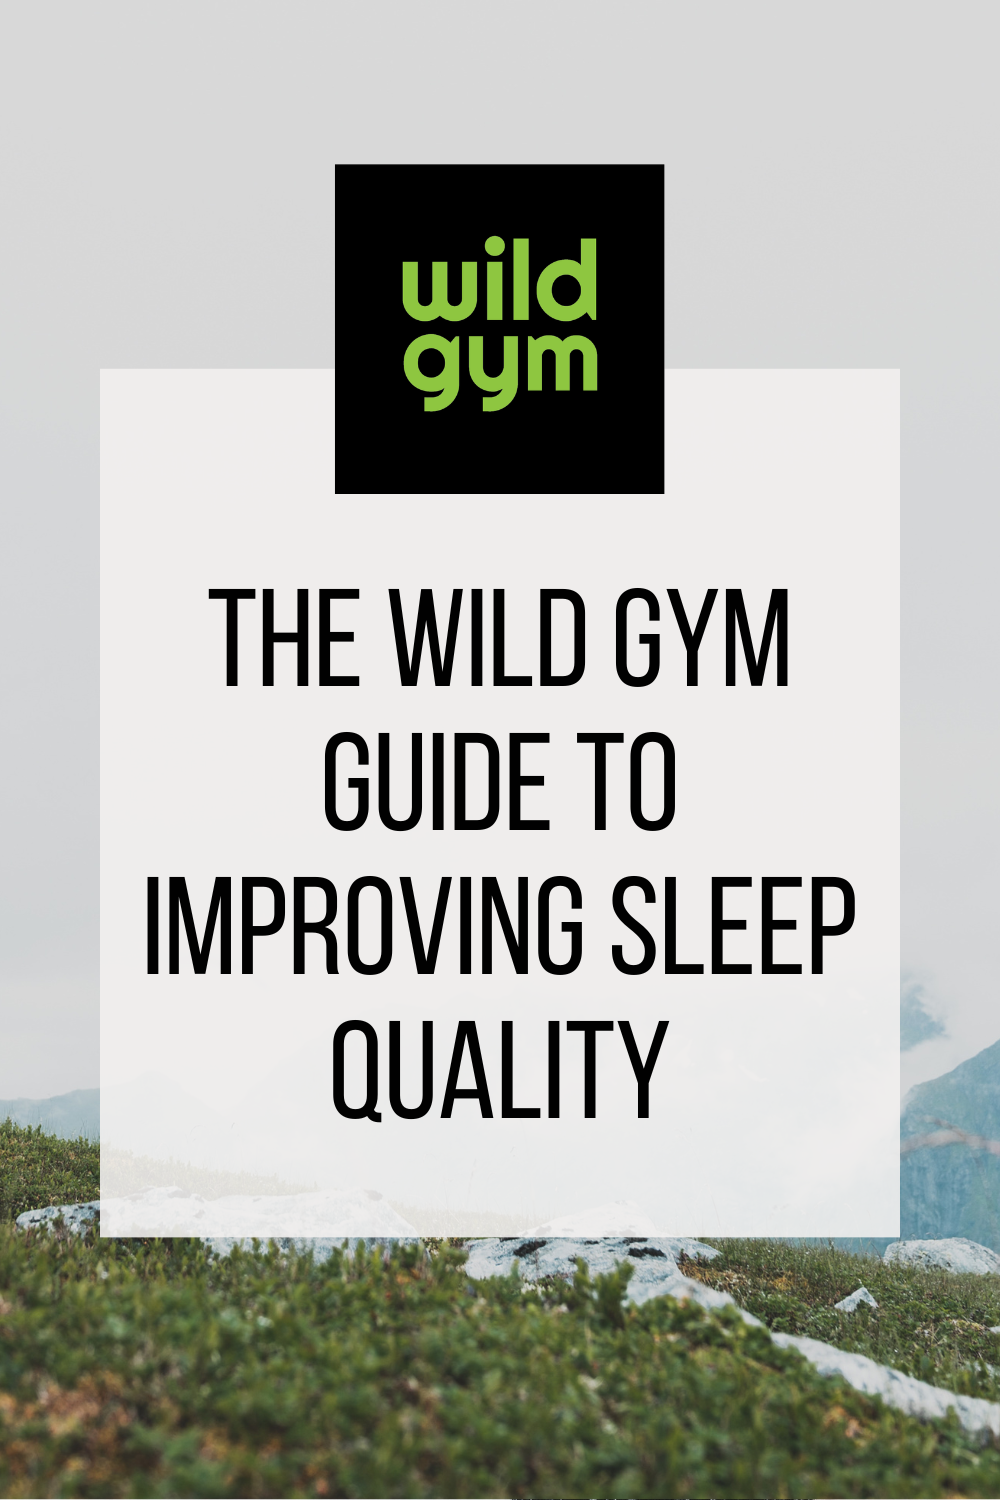 The Wild Gym Guide to Improving Sleep Quality